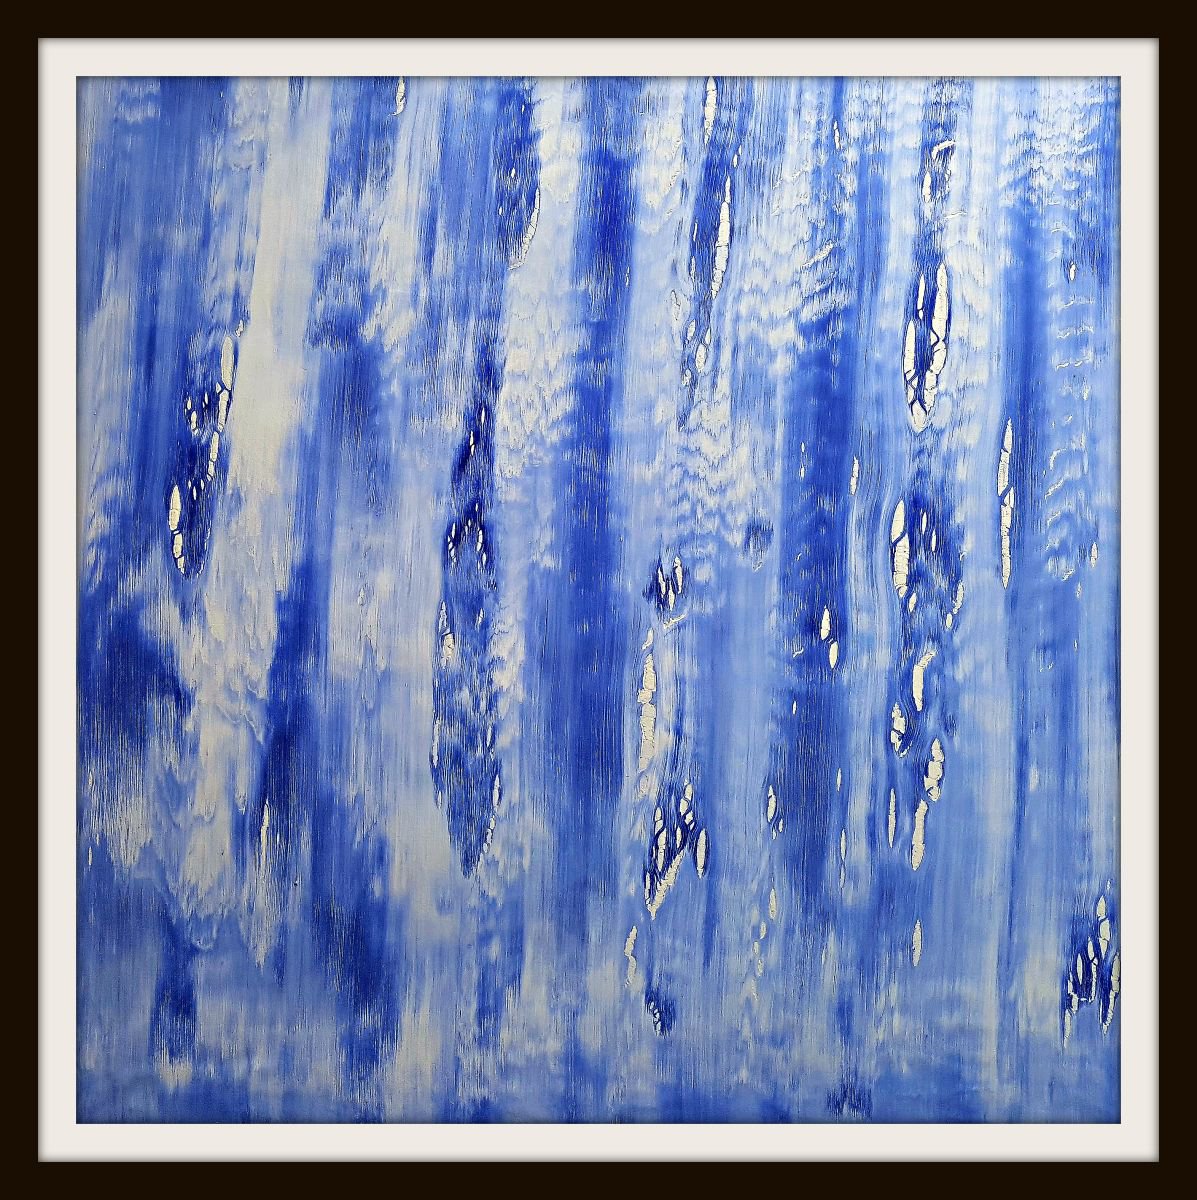 Sliding time - blue (n.276) - 90 x 90 x 2,50 cm - ready to hang - acrylic painting on stre... by Alessio Mazzarulli